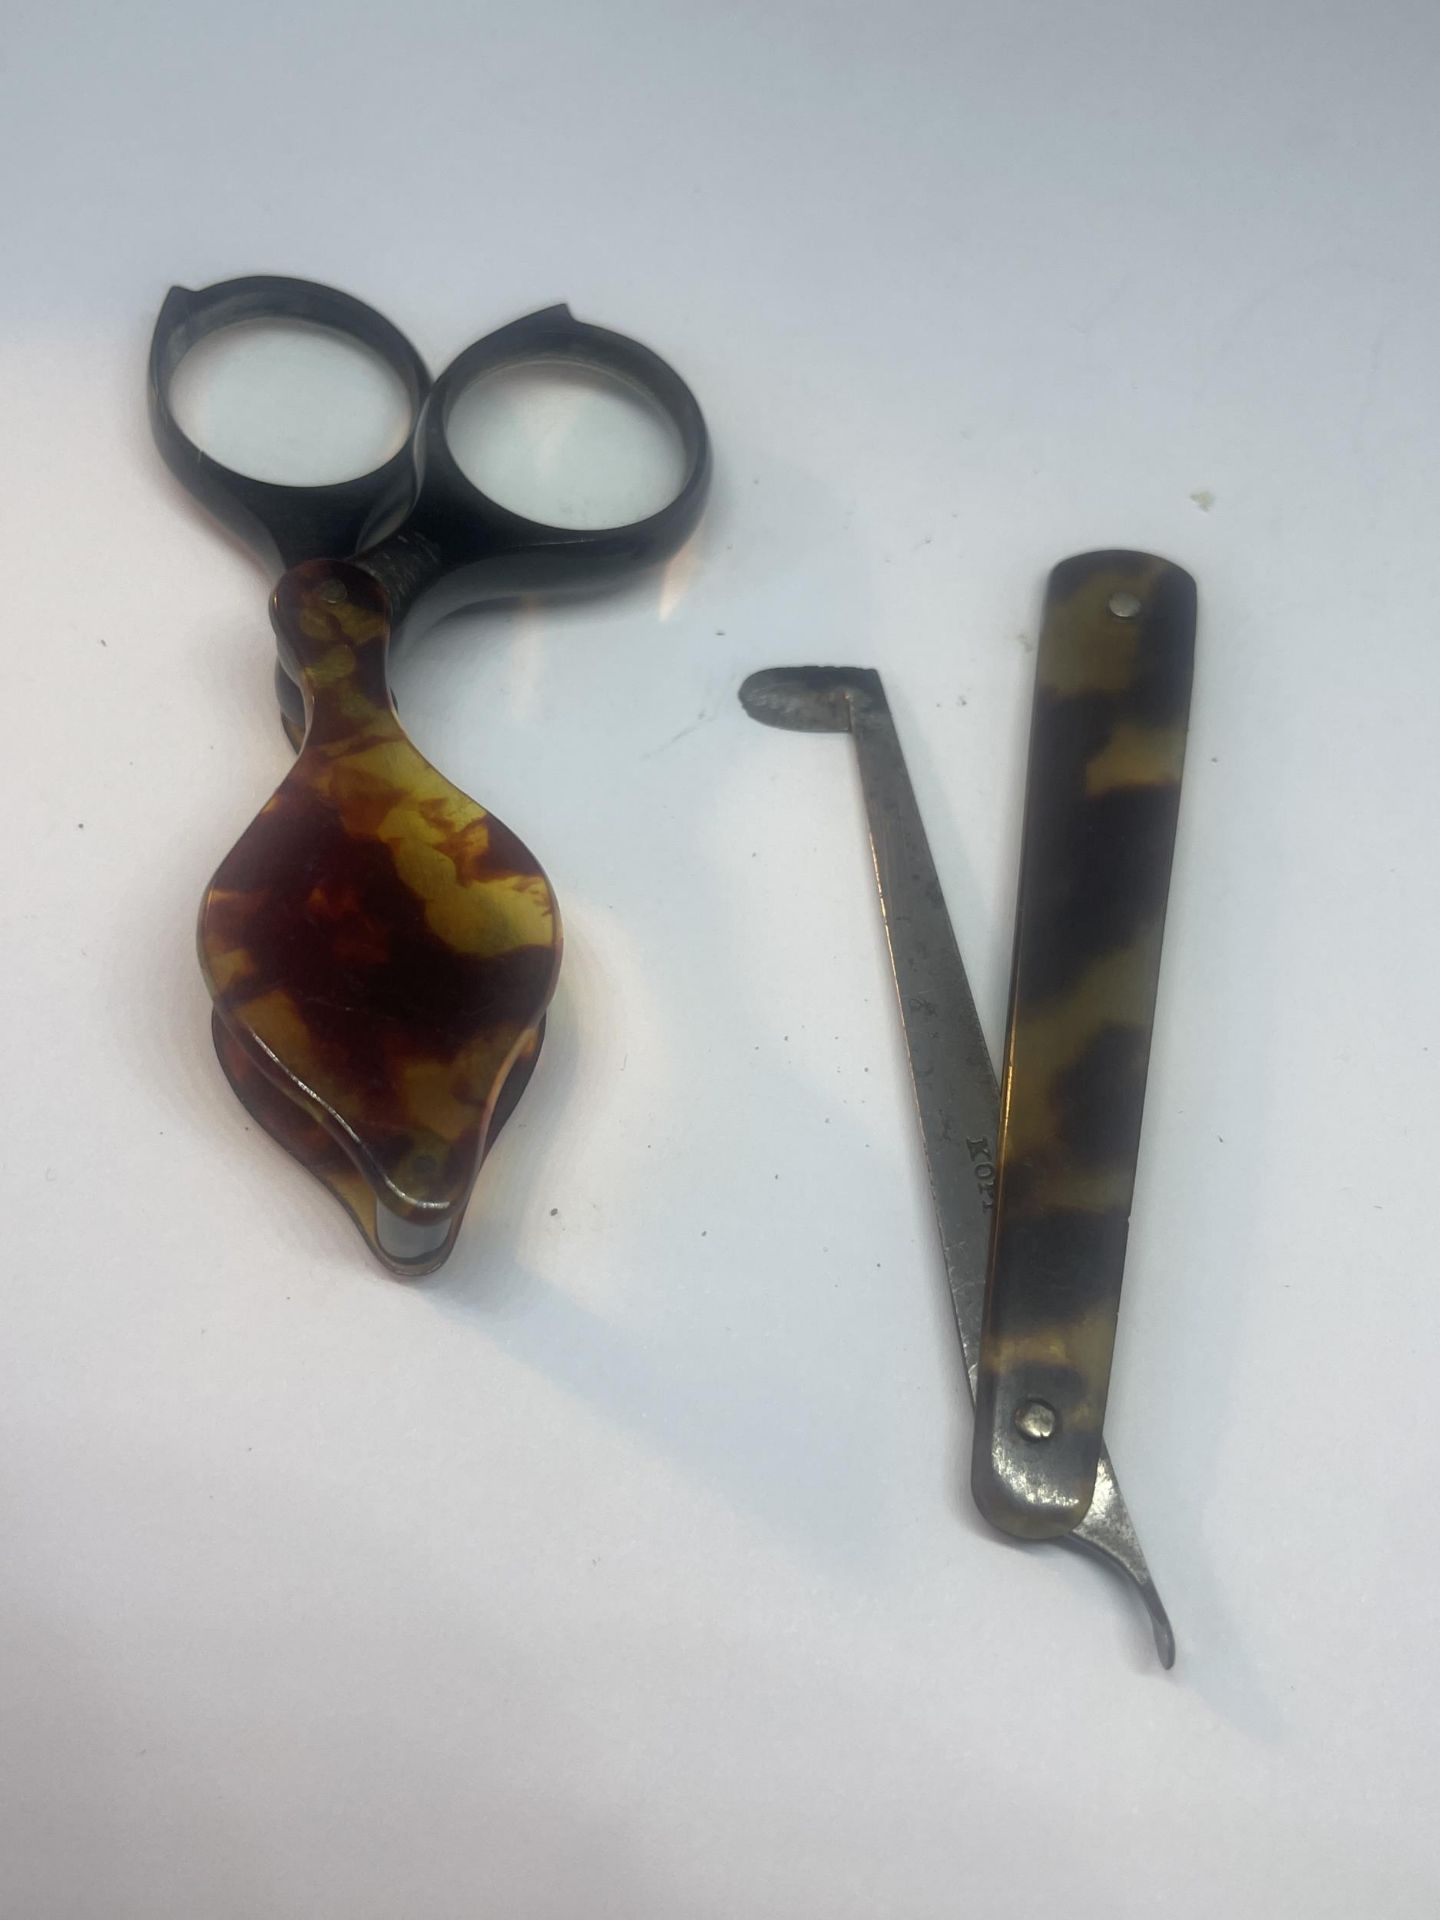 THREE VINTAGE POSSIBLY TORTOISE SHELL ITEMS TO INCLUDE A JEWELLERS LOOP, A PENKNIFE AND A KOPP BLOOD - Image 5 of 7